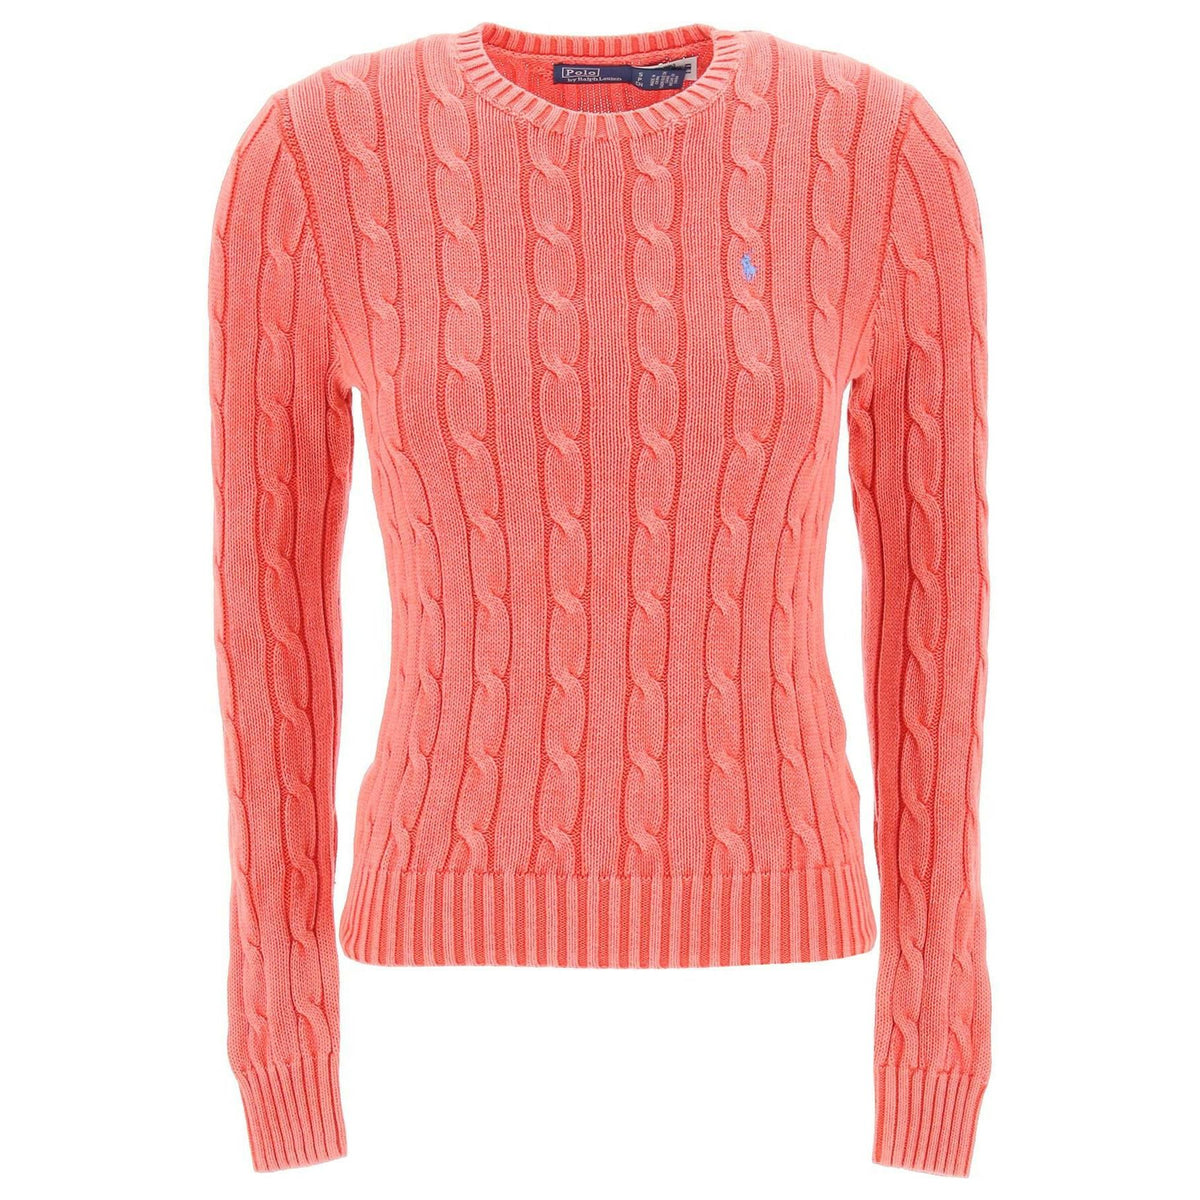 Coral Cable Knit Cotton Sweater